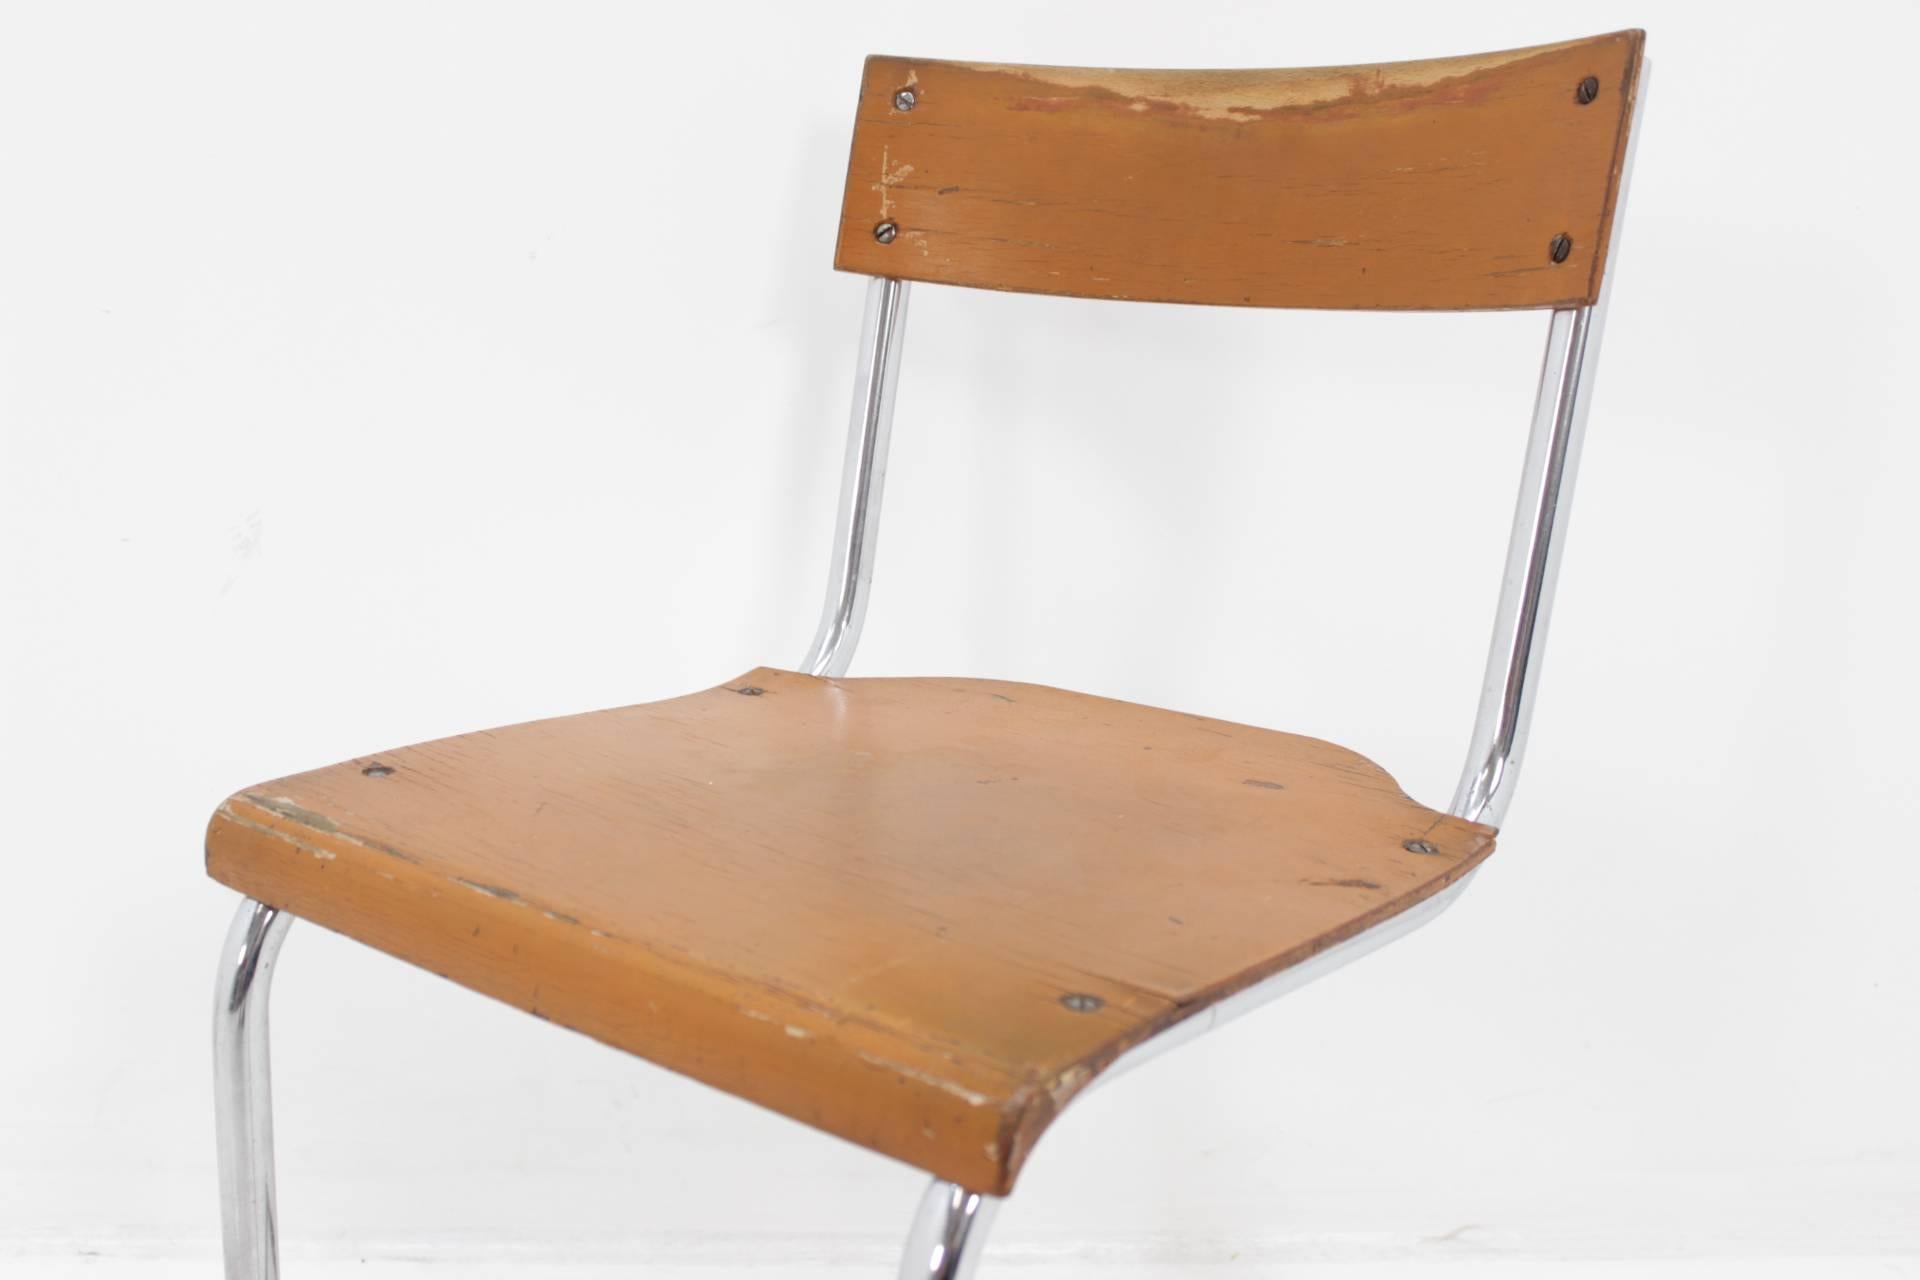 - Producer: Unknown, maybe Thonet
- Original orange color
- Chrome with patina
- Original condition (see detailed pictures)
- circa 1930.